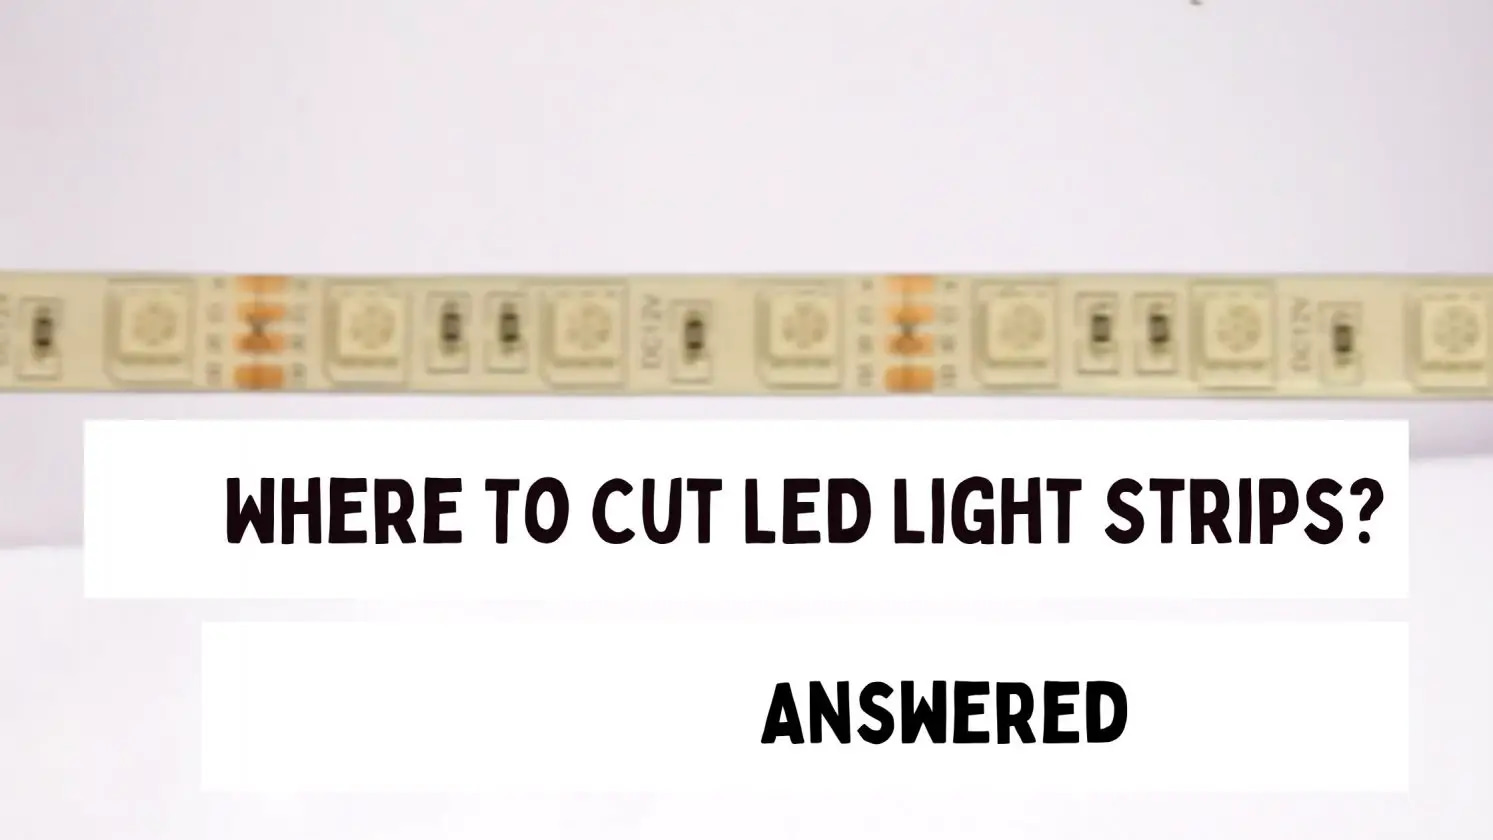 Where To Cut LED Light Strips?